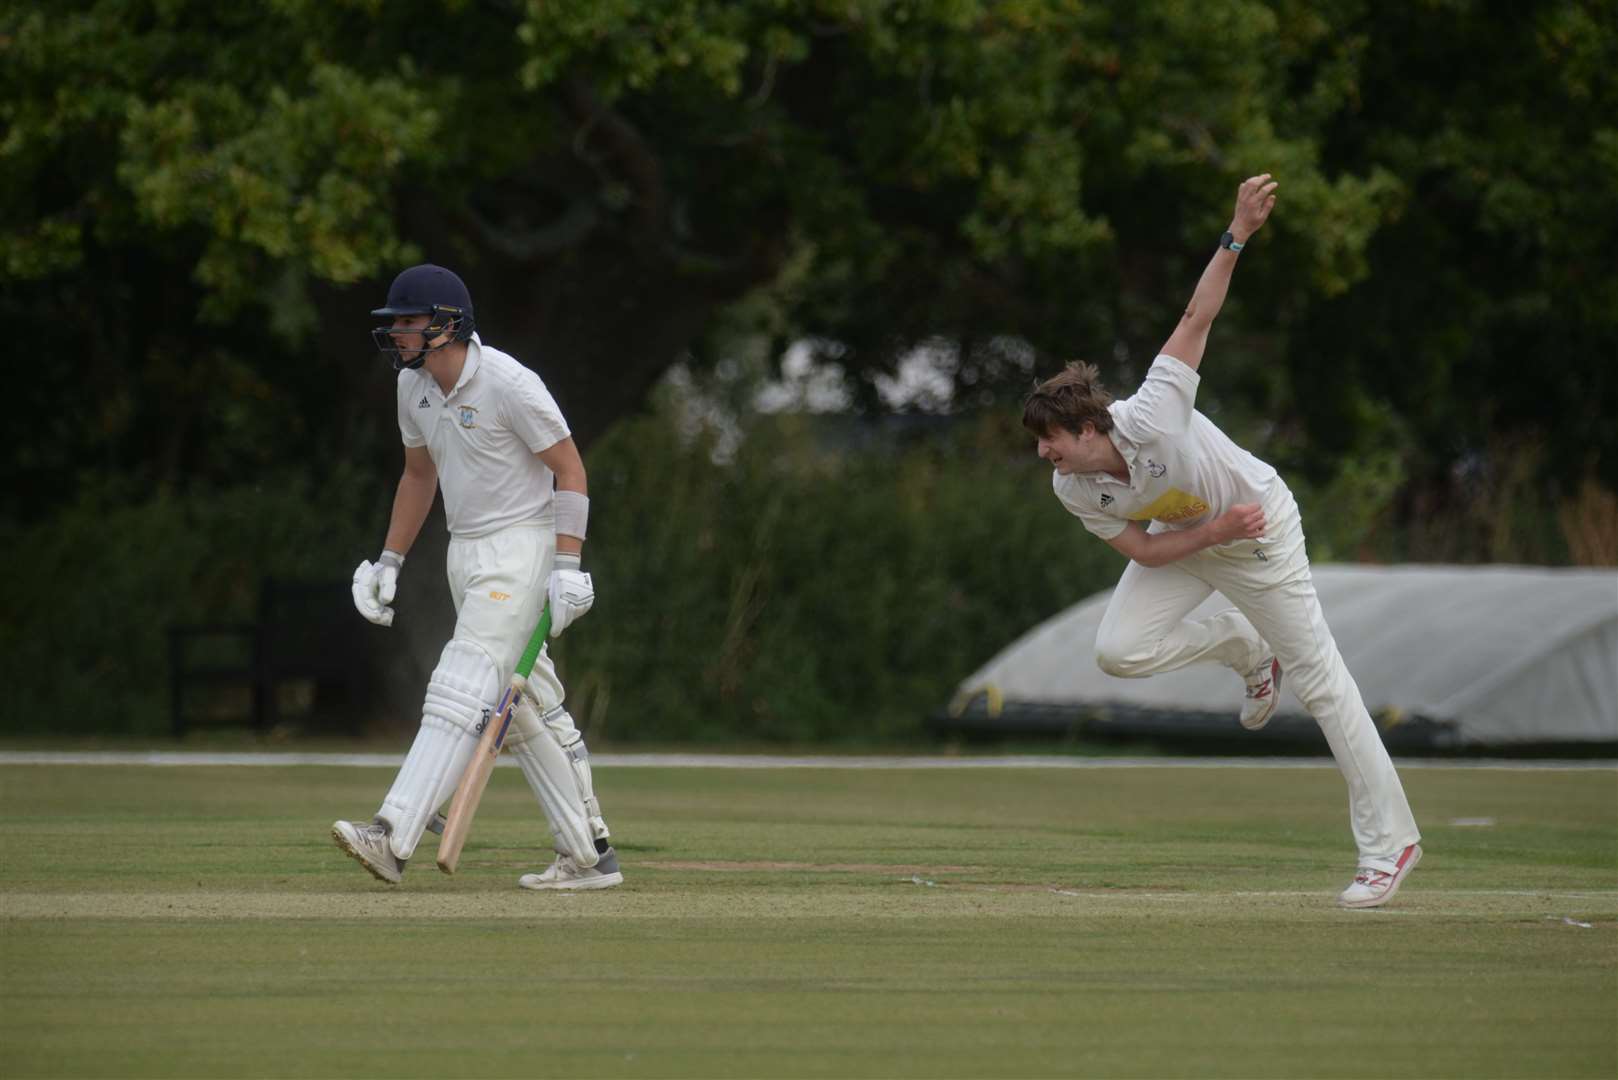 Canterbury's Ben Rutherford watches the action as Sevenoaks bowler Tom Parsons sends down another delivery. Picture: Chris Davey